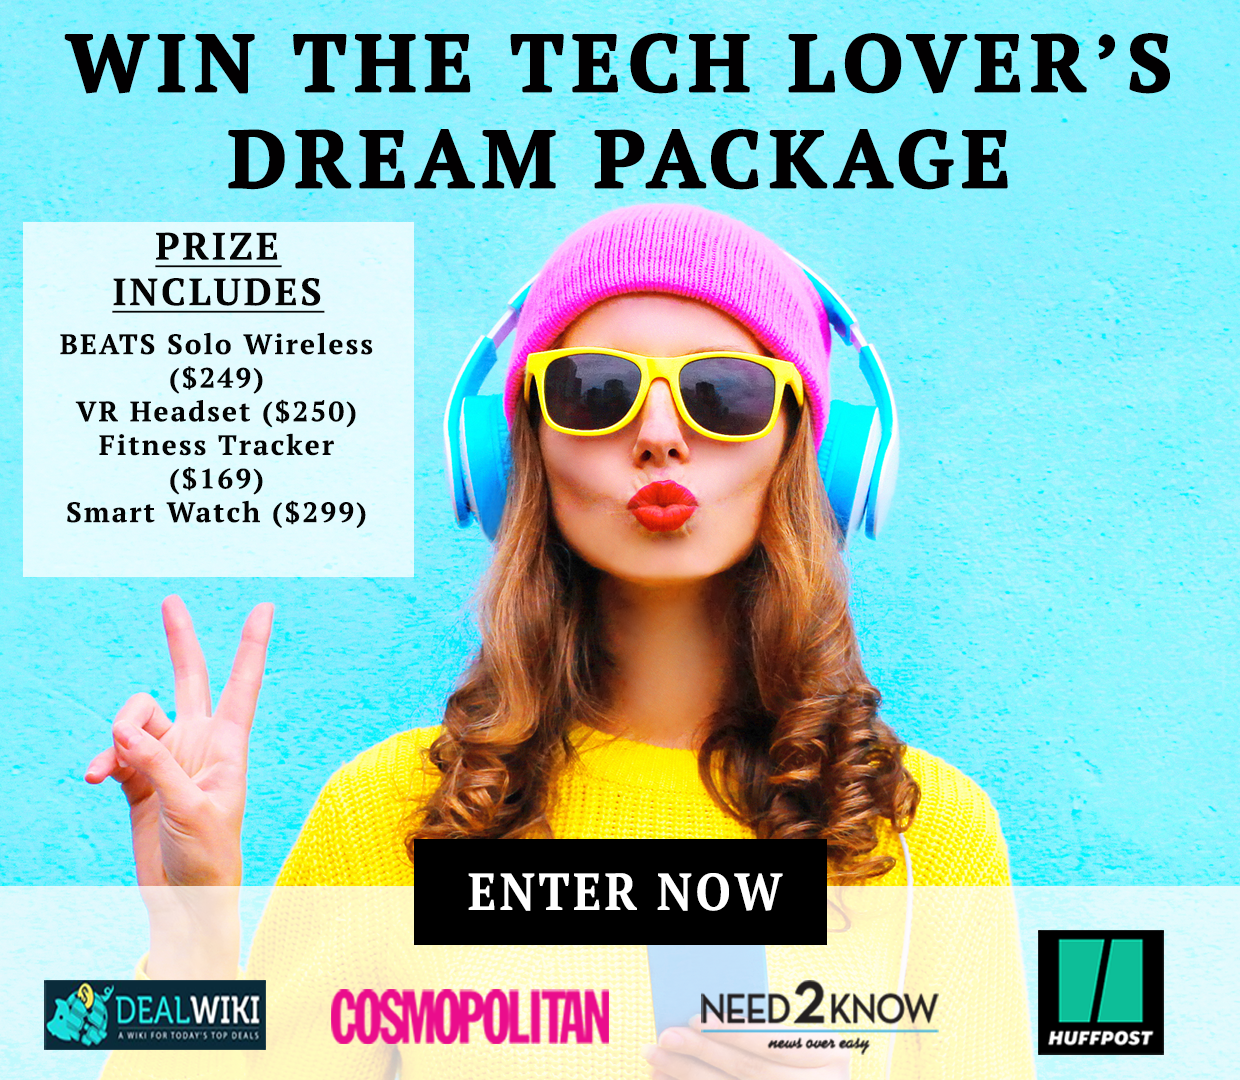 Enter to Win the Tech Lover's Dream Package which includes BEATS and much more!